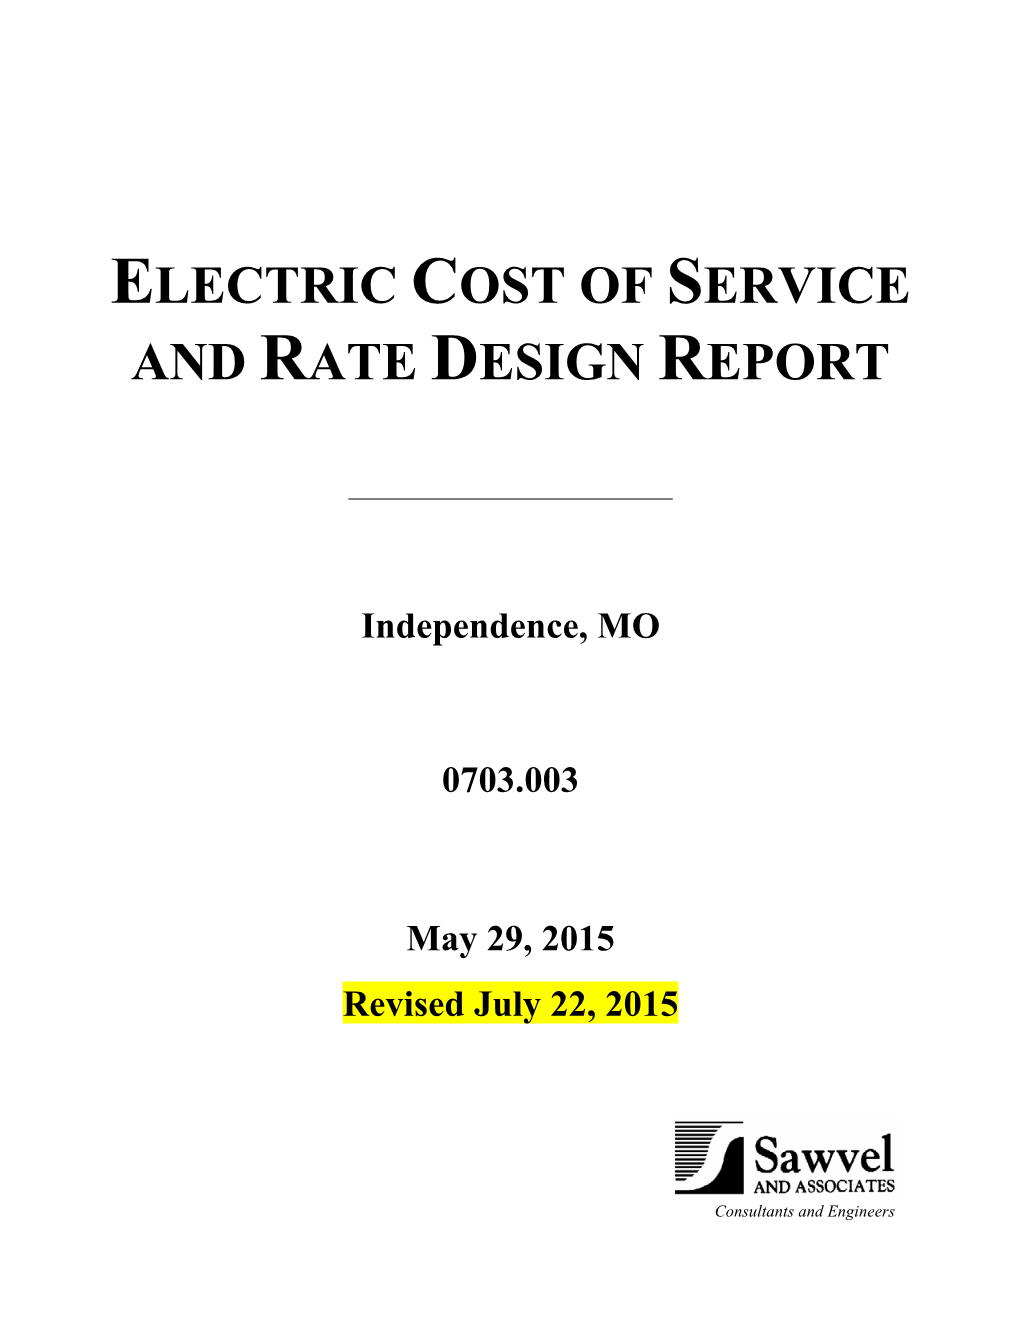 Electric Cost of Service and Rate Design Report